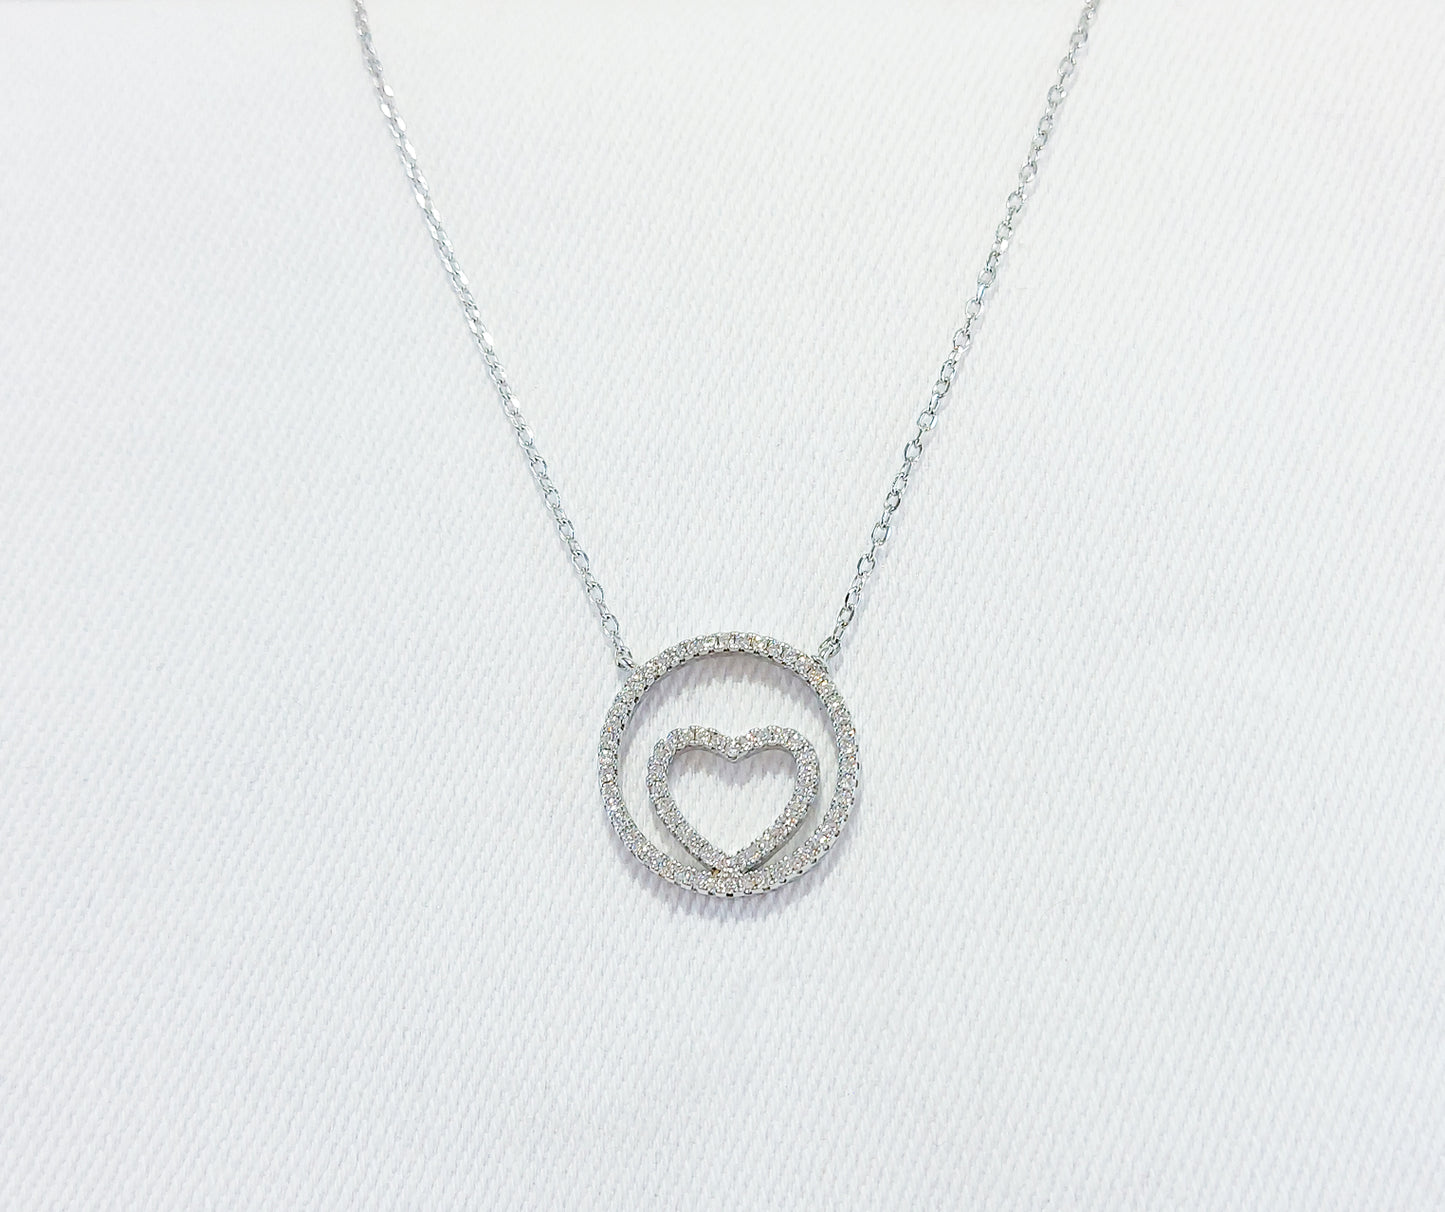 Sterling Silver Heart and Circle of Life Necklace with Cubic Zirconia Stones